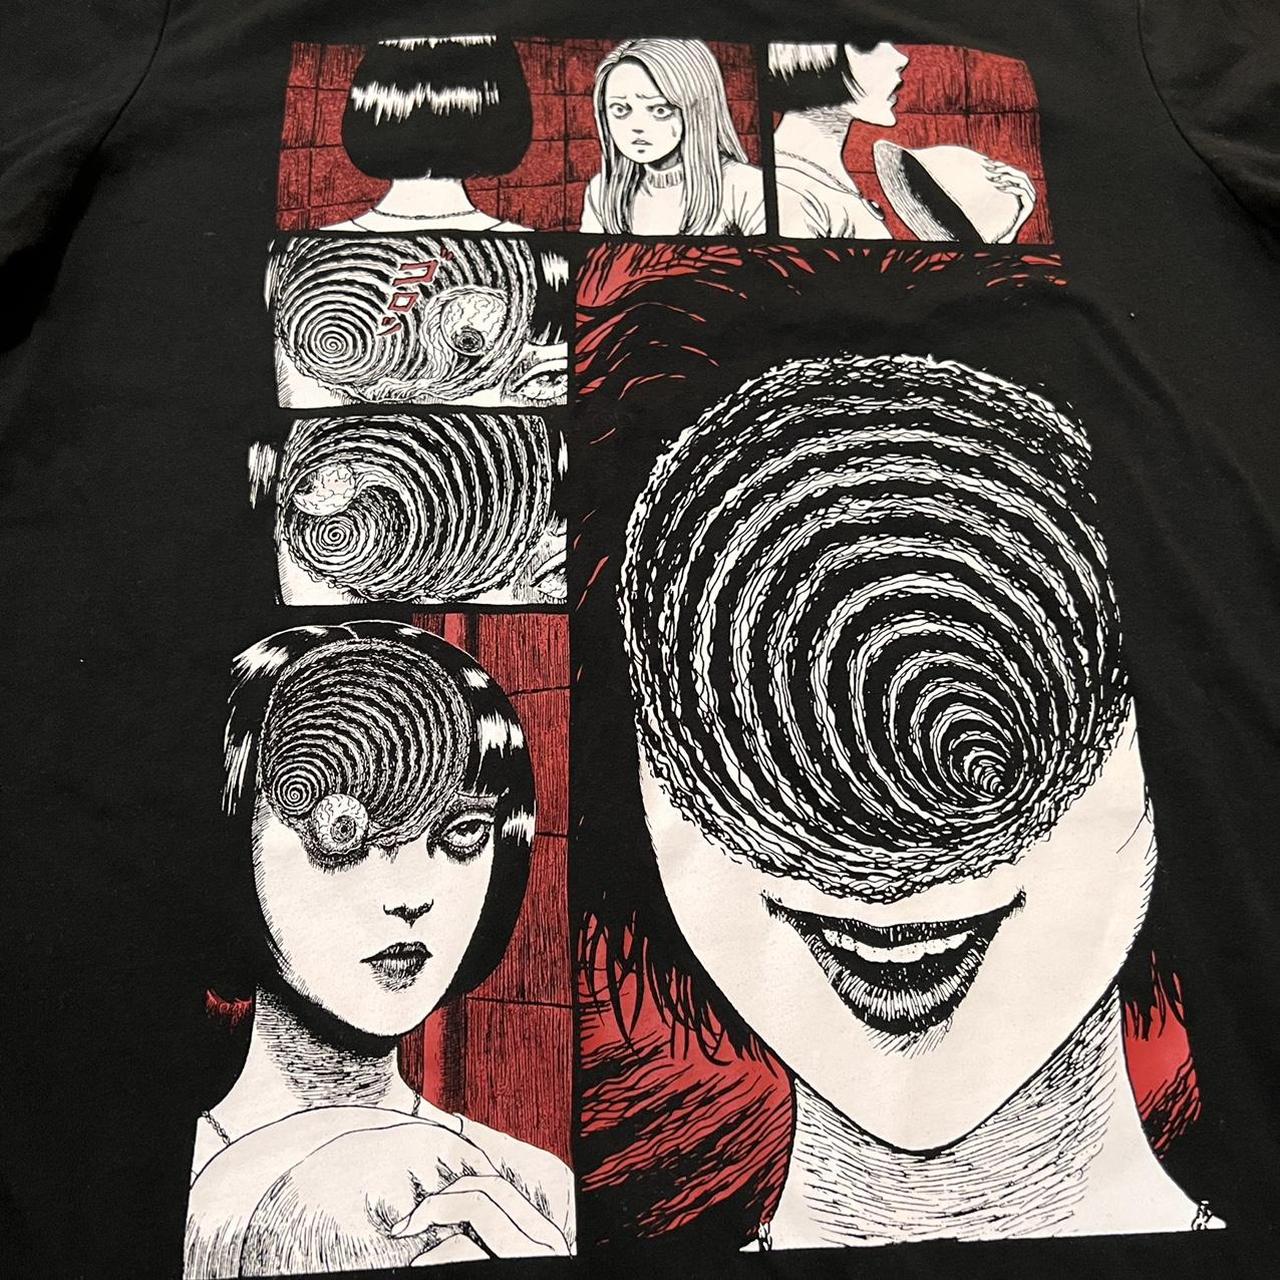 Hot Topic Women's Black and Red T-shirt (2)